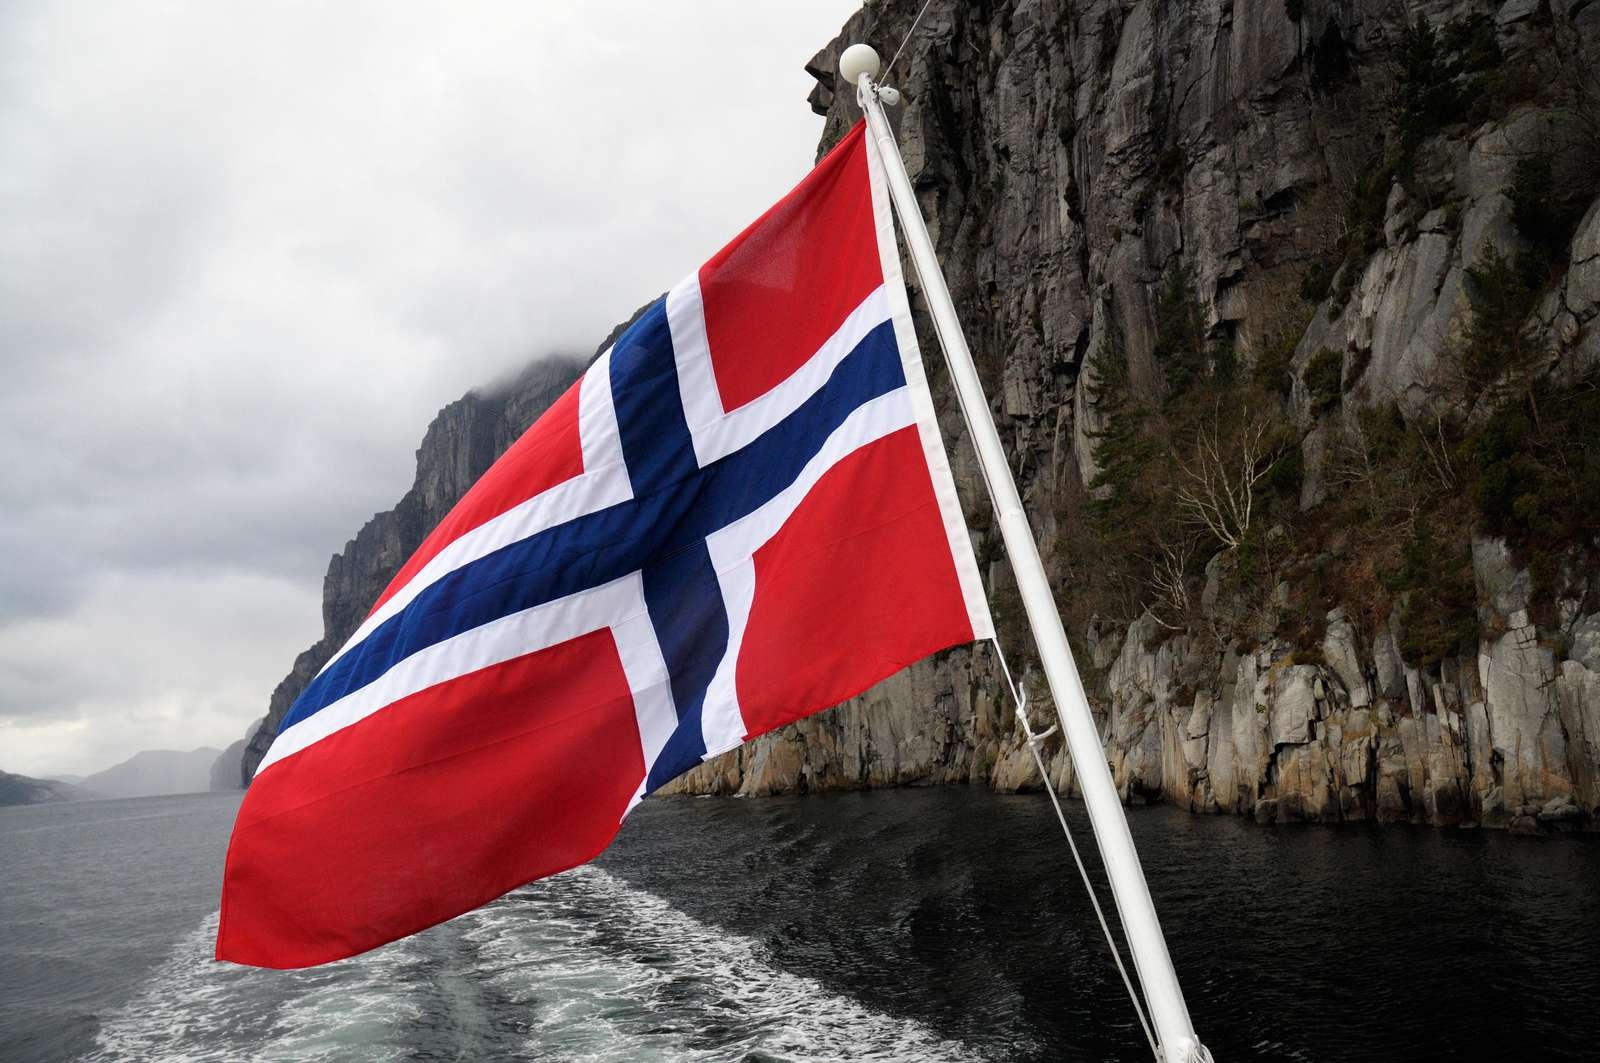 A leading boat is sailing with a Norwegian flag at the end of the boat. The rocks of Lysefjorden and a cloudy sky are in the background.